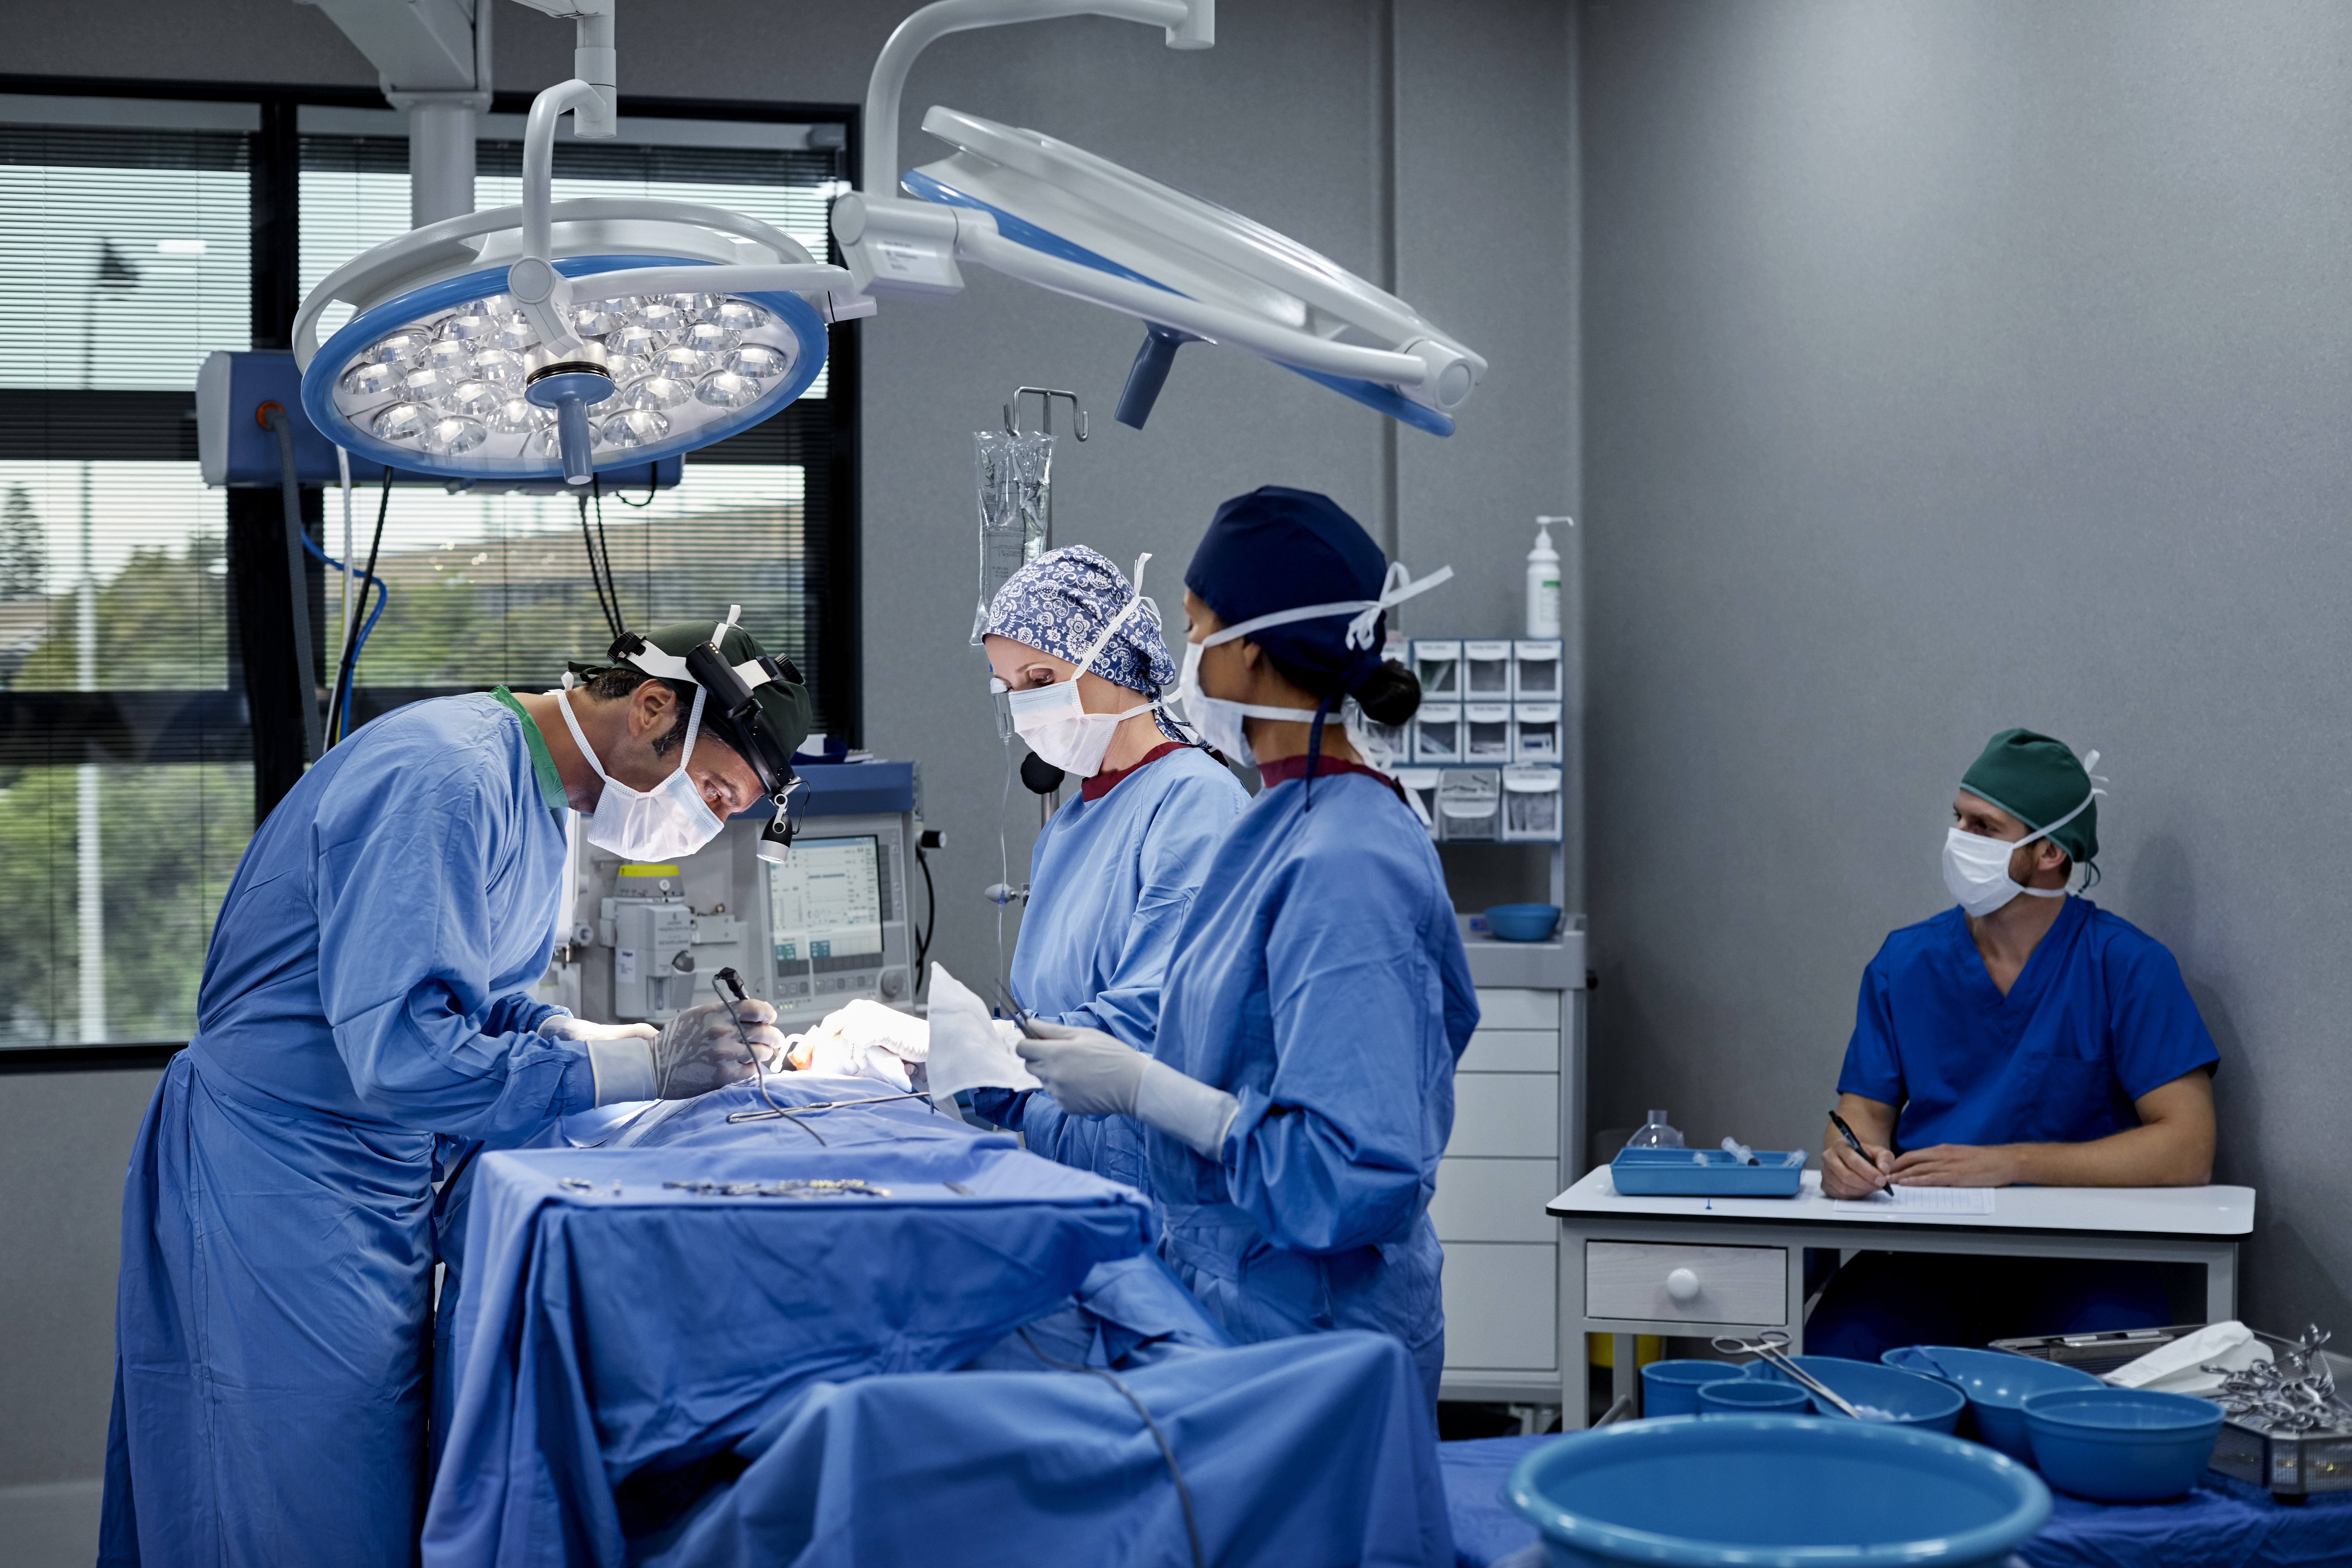 Surgeons operating patient in hospital